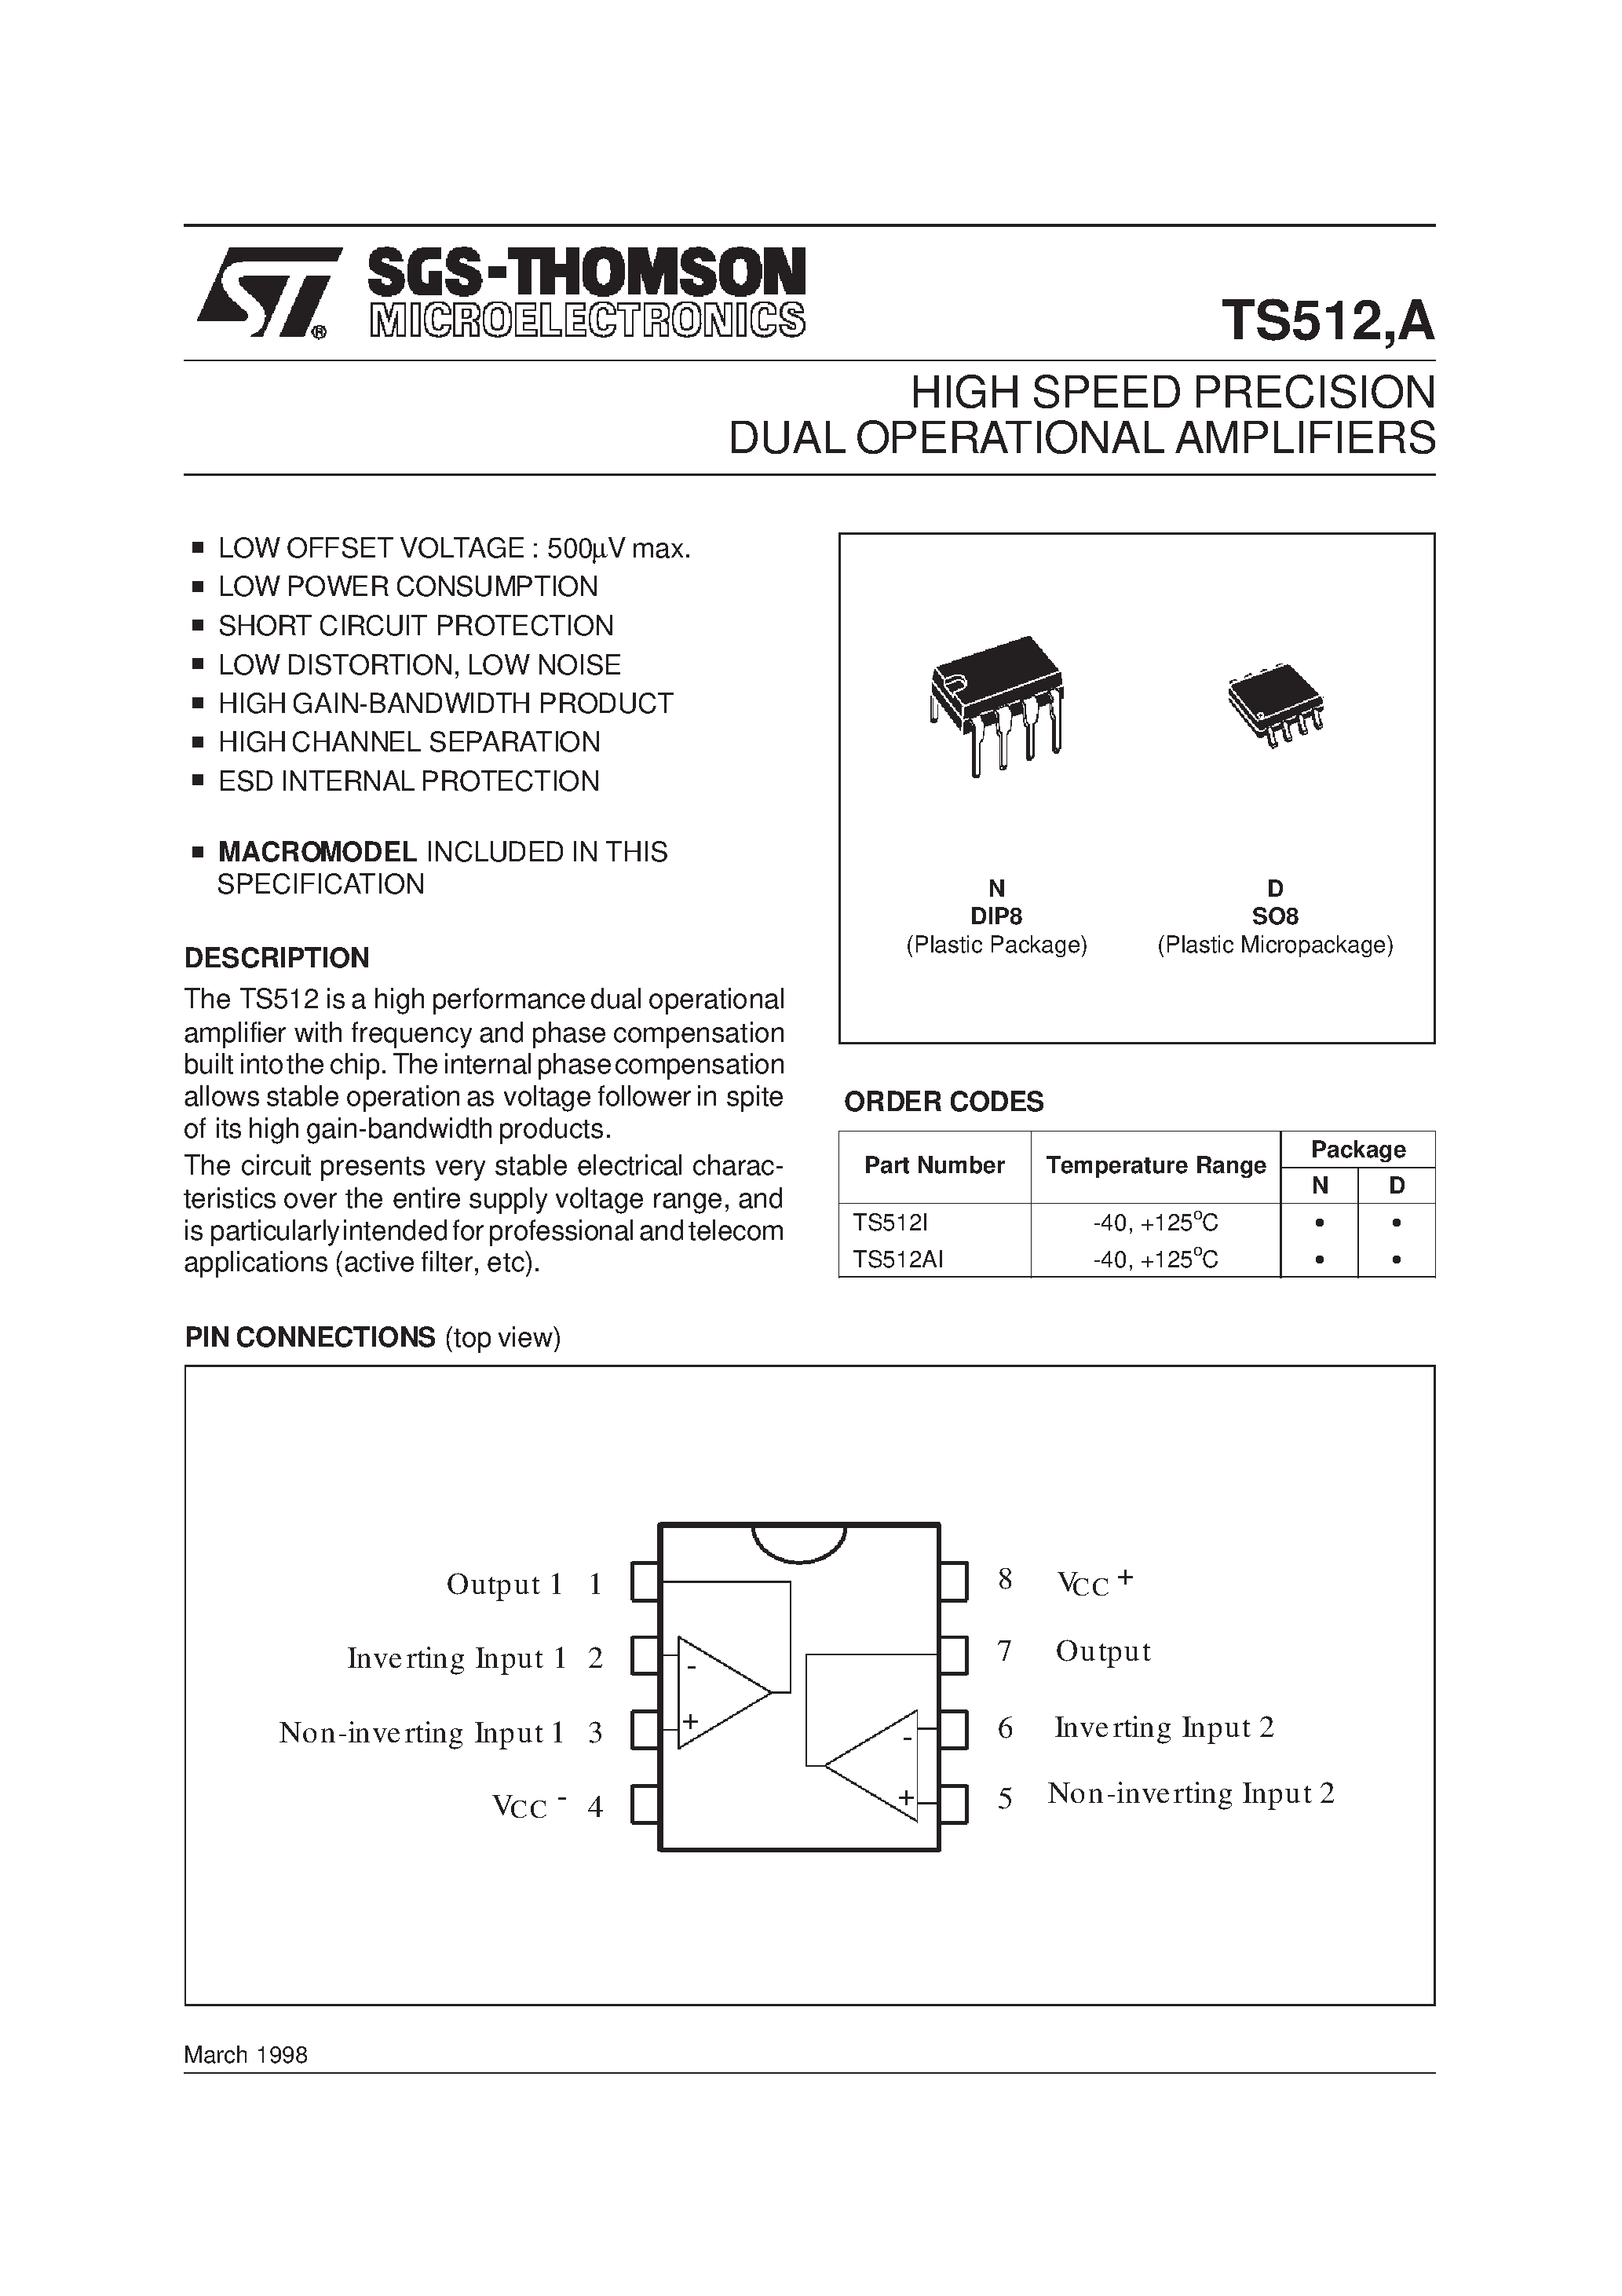 Datasheet TS512I - HIGH SPEED PRECISION DUAL OPERATIONAL AMPLIFIERS page 1